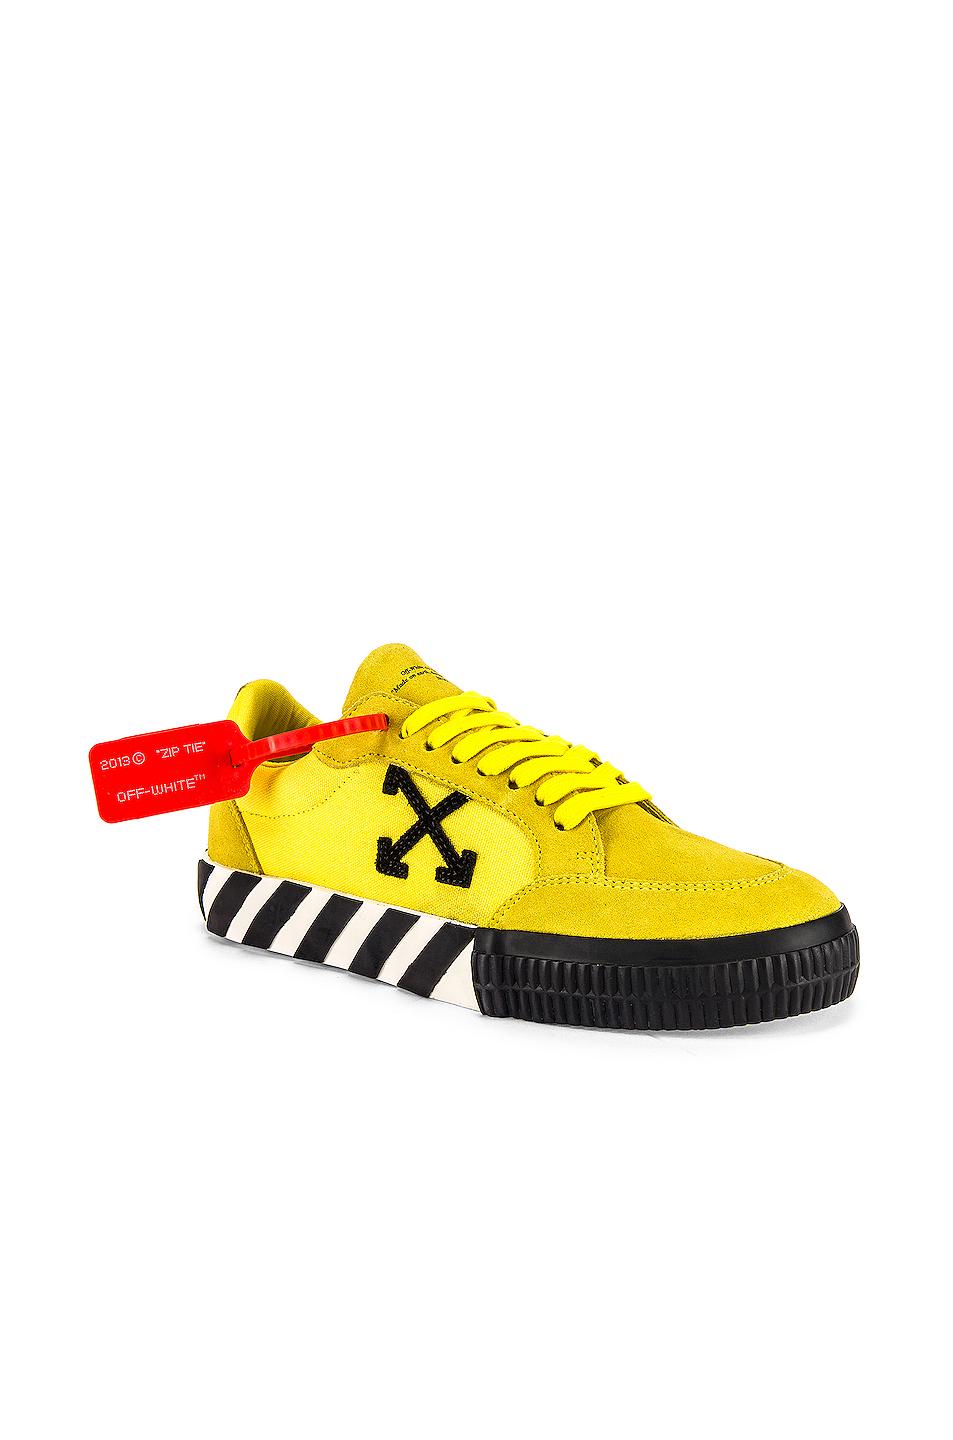 Off-White c/o Virgil Abloh Leather Trainers in Yellow for Men Mens Shoes Trainers Low-top trainers 